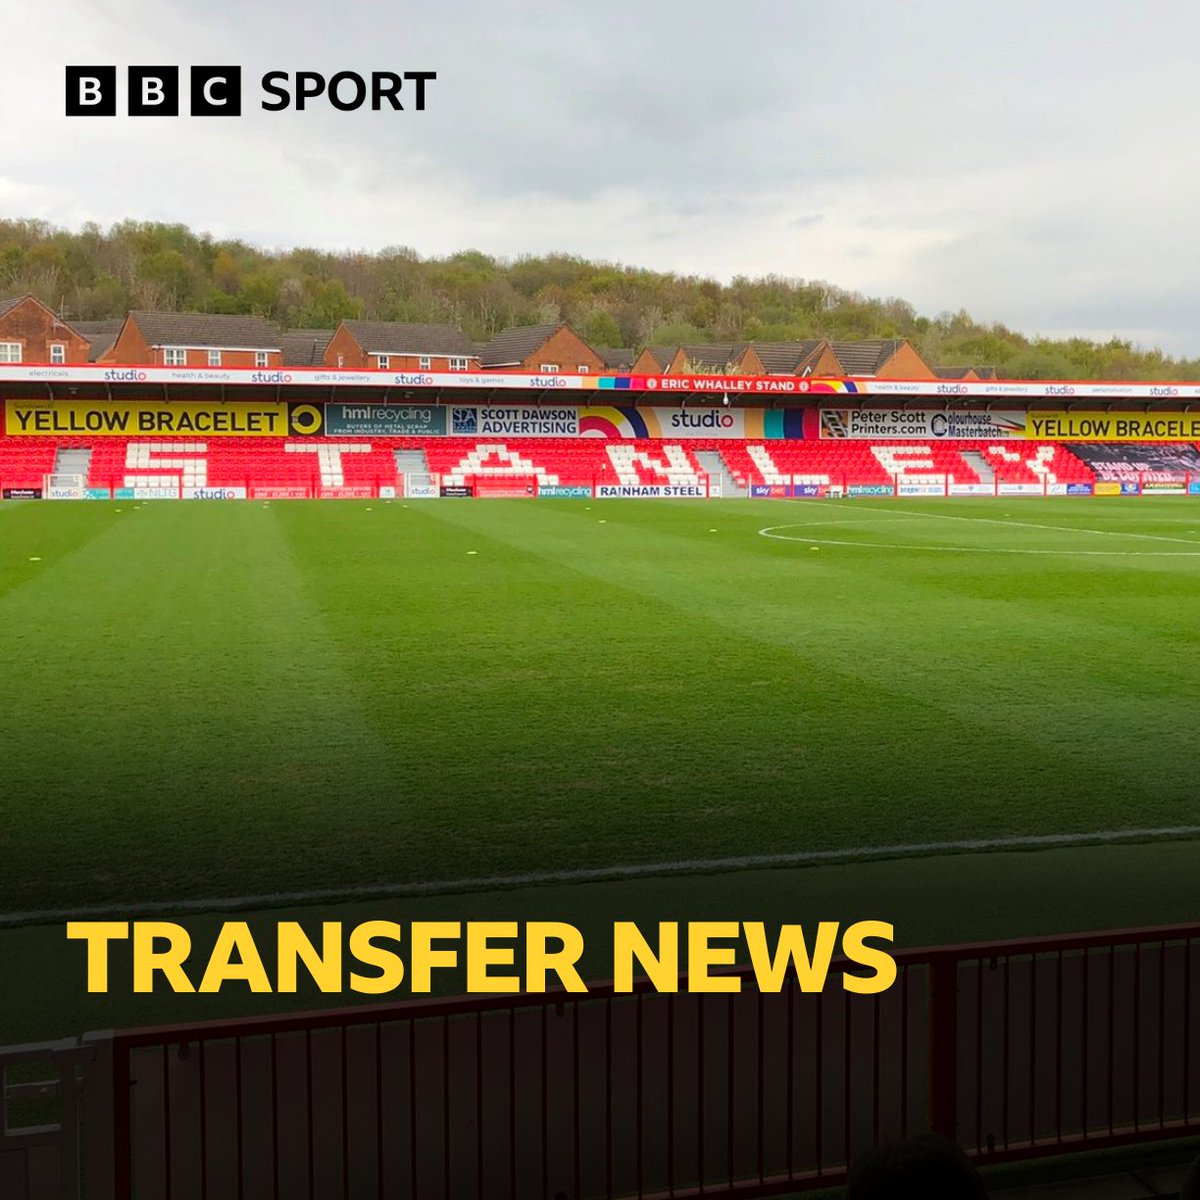 #Accrington Stanley have signed @bostonunited striker @KelseyMooney99 on a two-year contract #asfc | #bbcefl | #bbcfootball